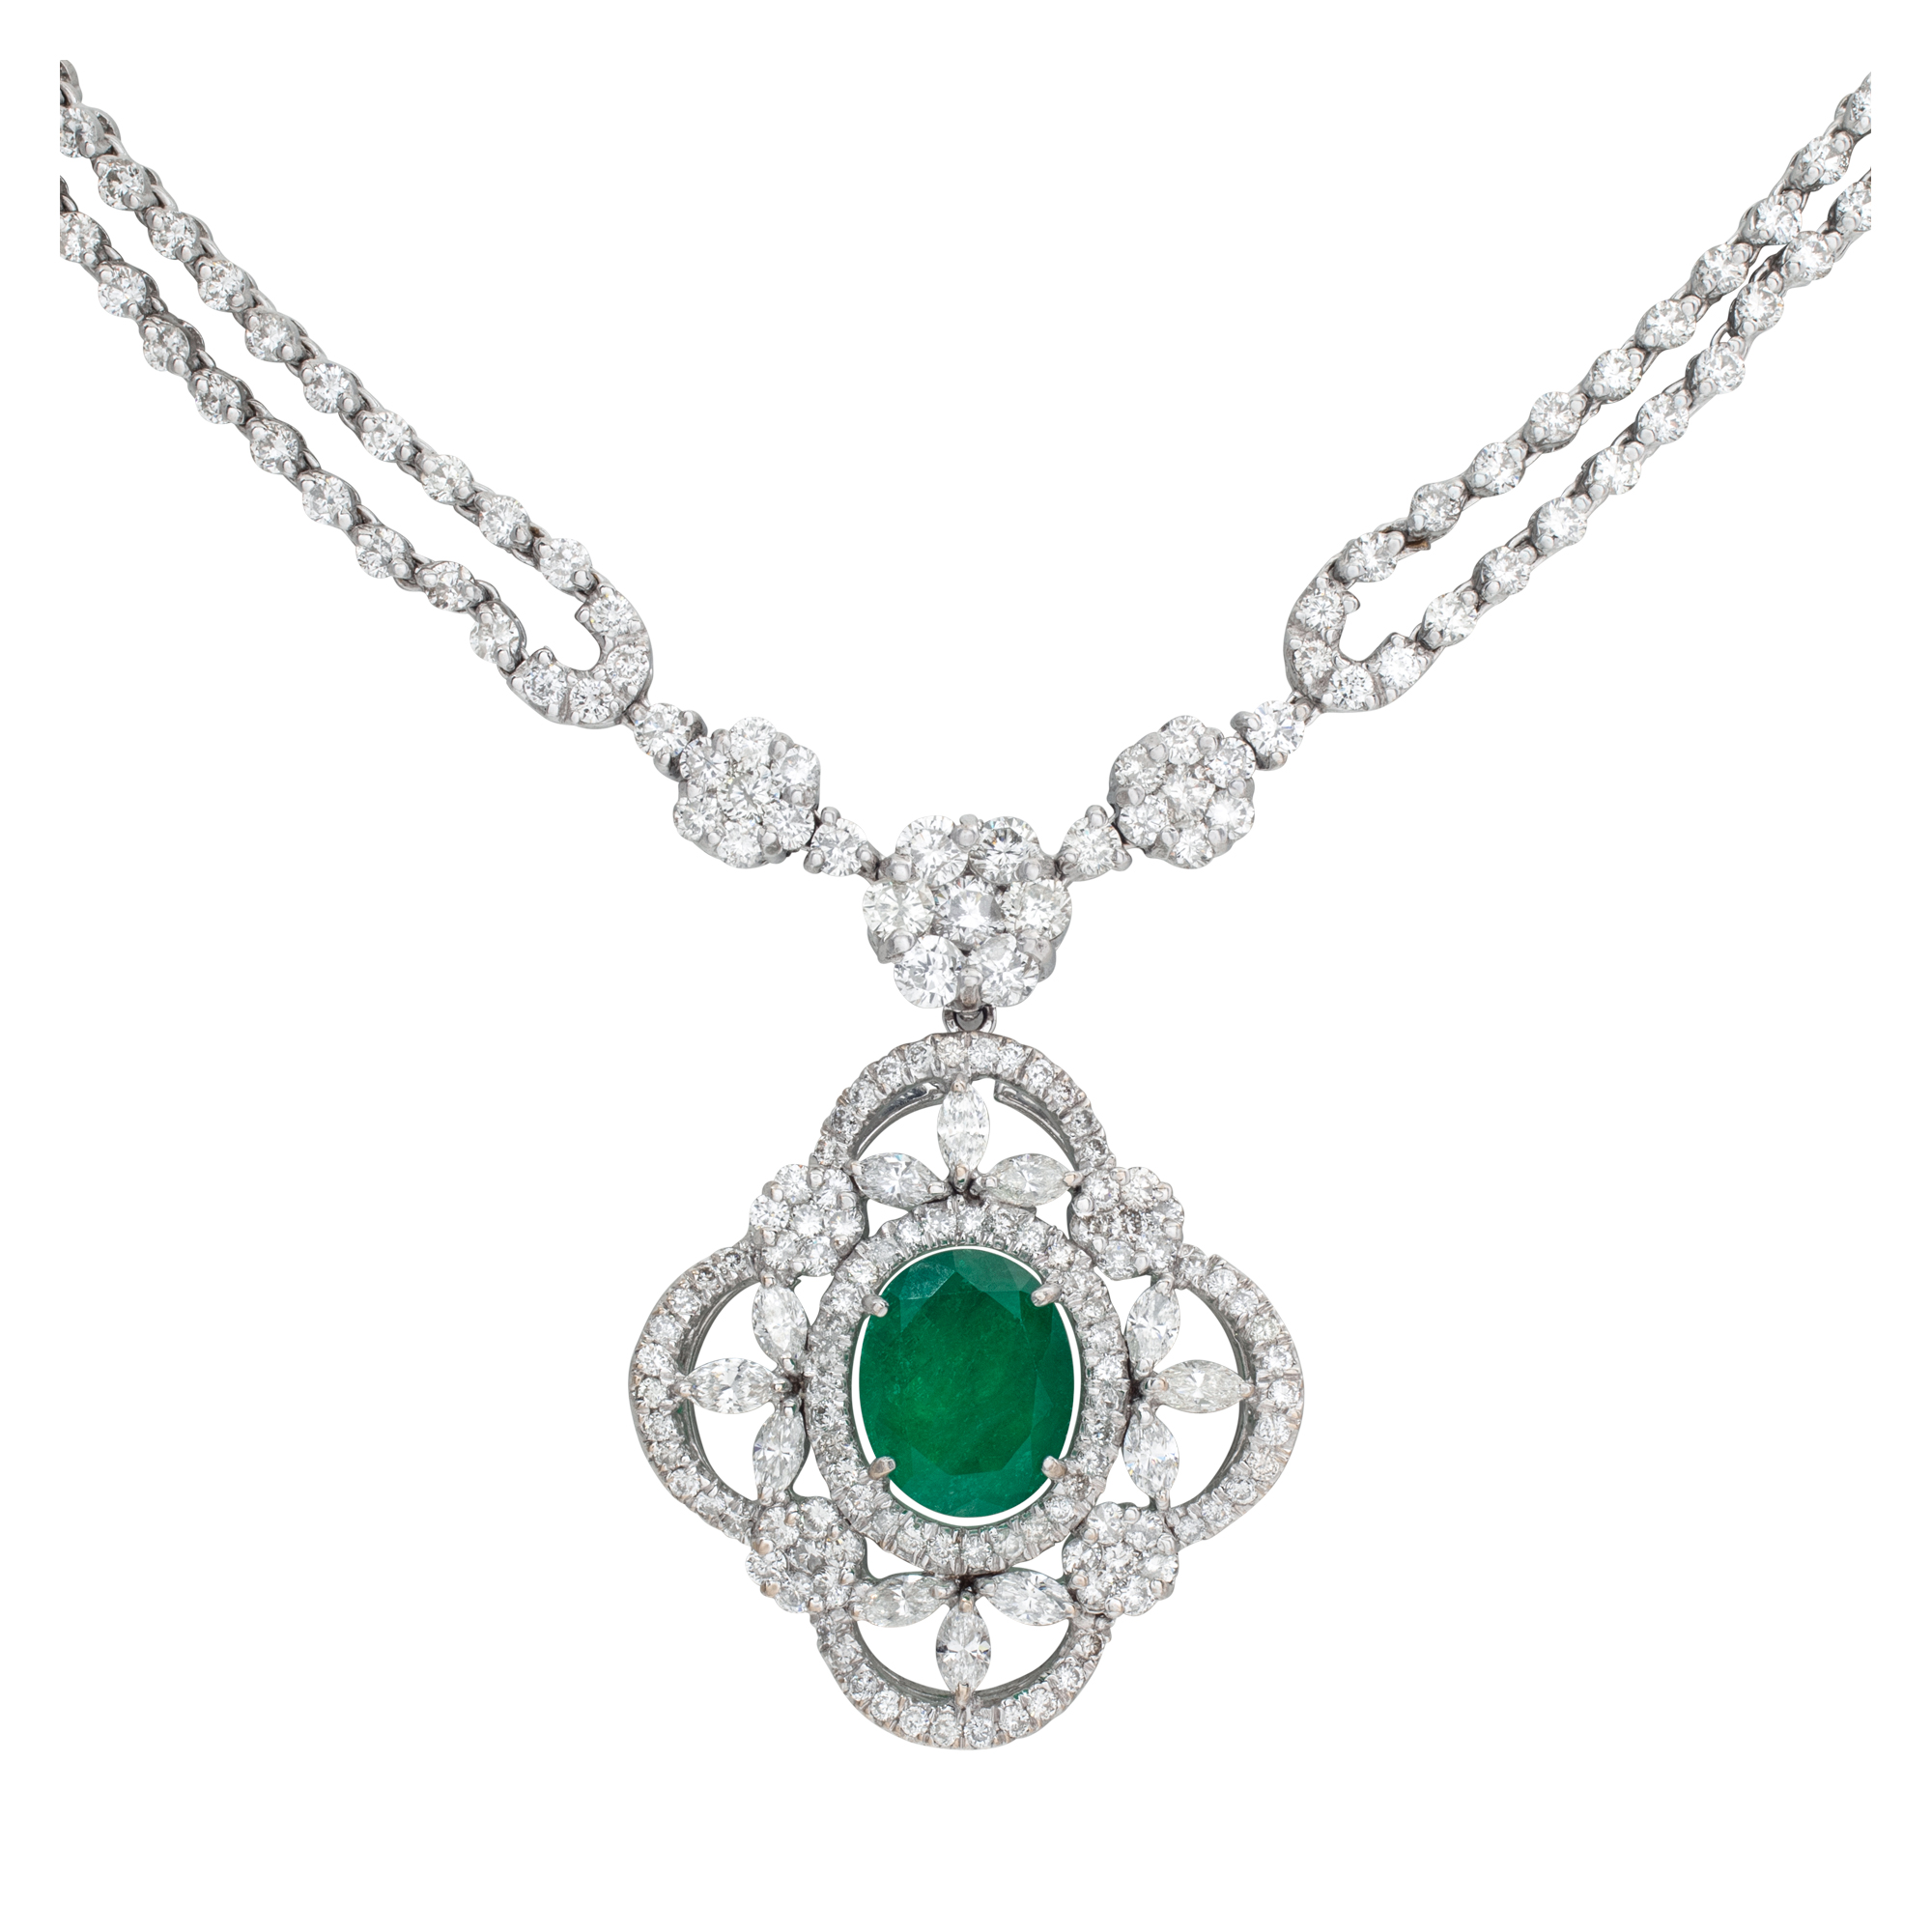 Magnificent oval shape 2.40 carat Colombian emerald and 12.40 carat diamonds necklace set in 18k white gold.